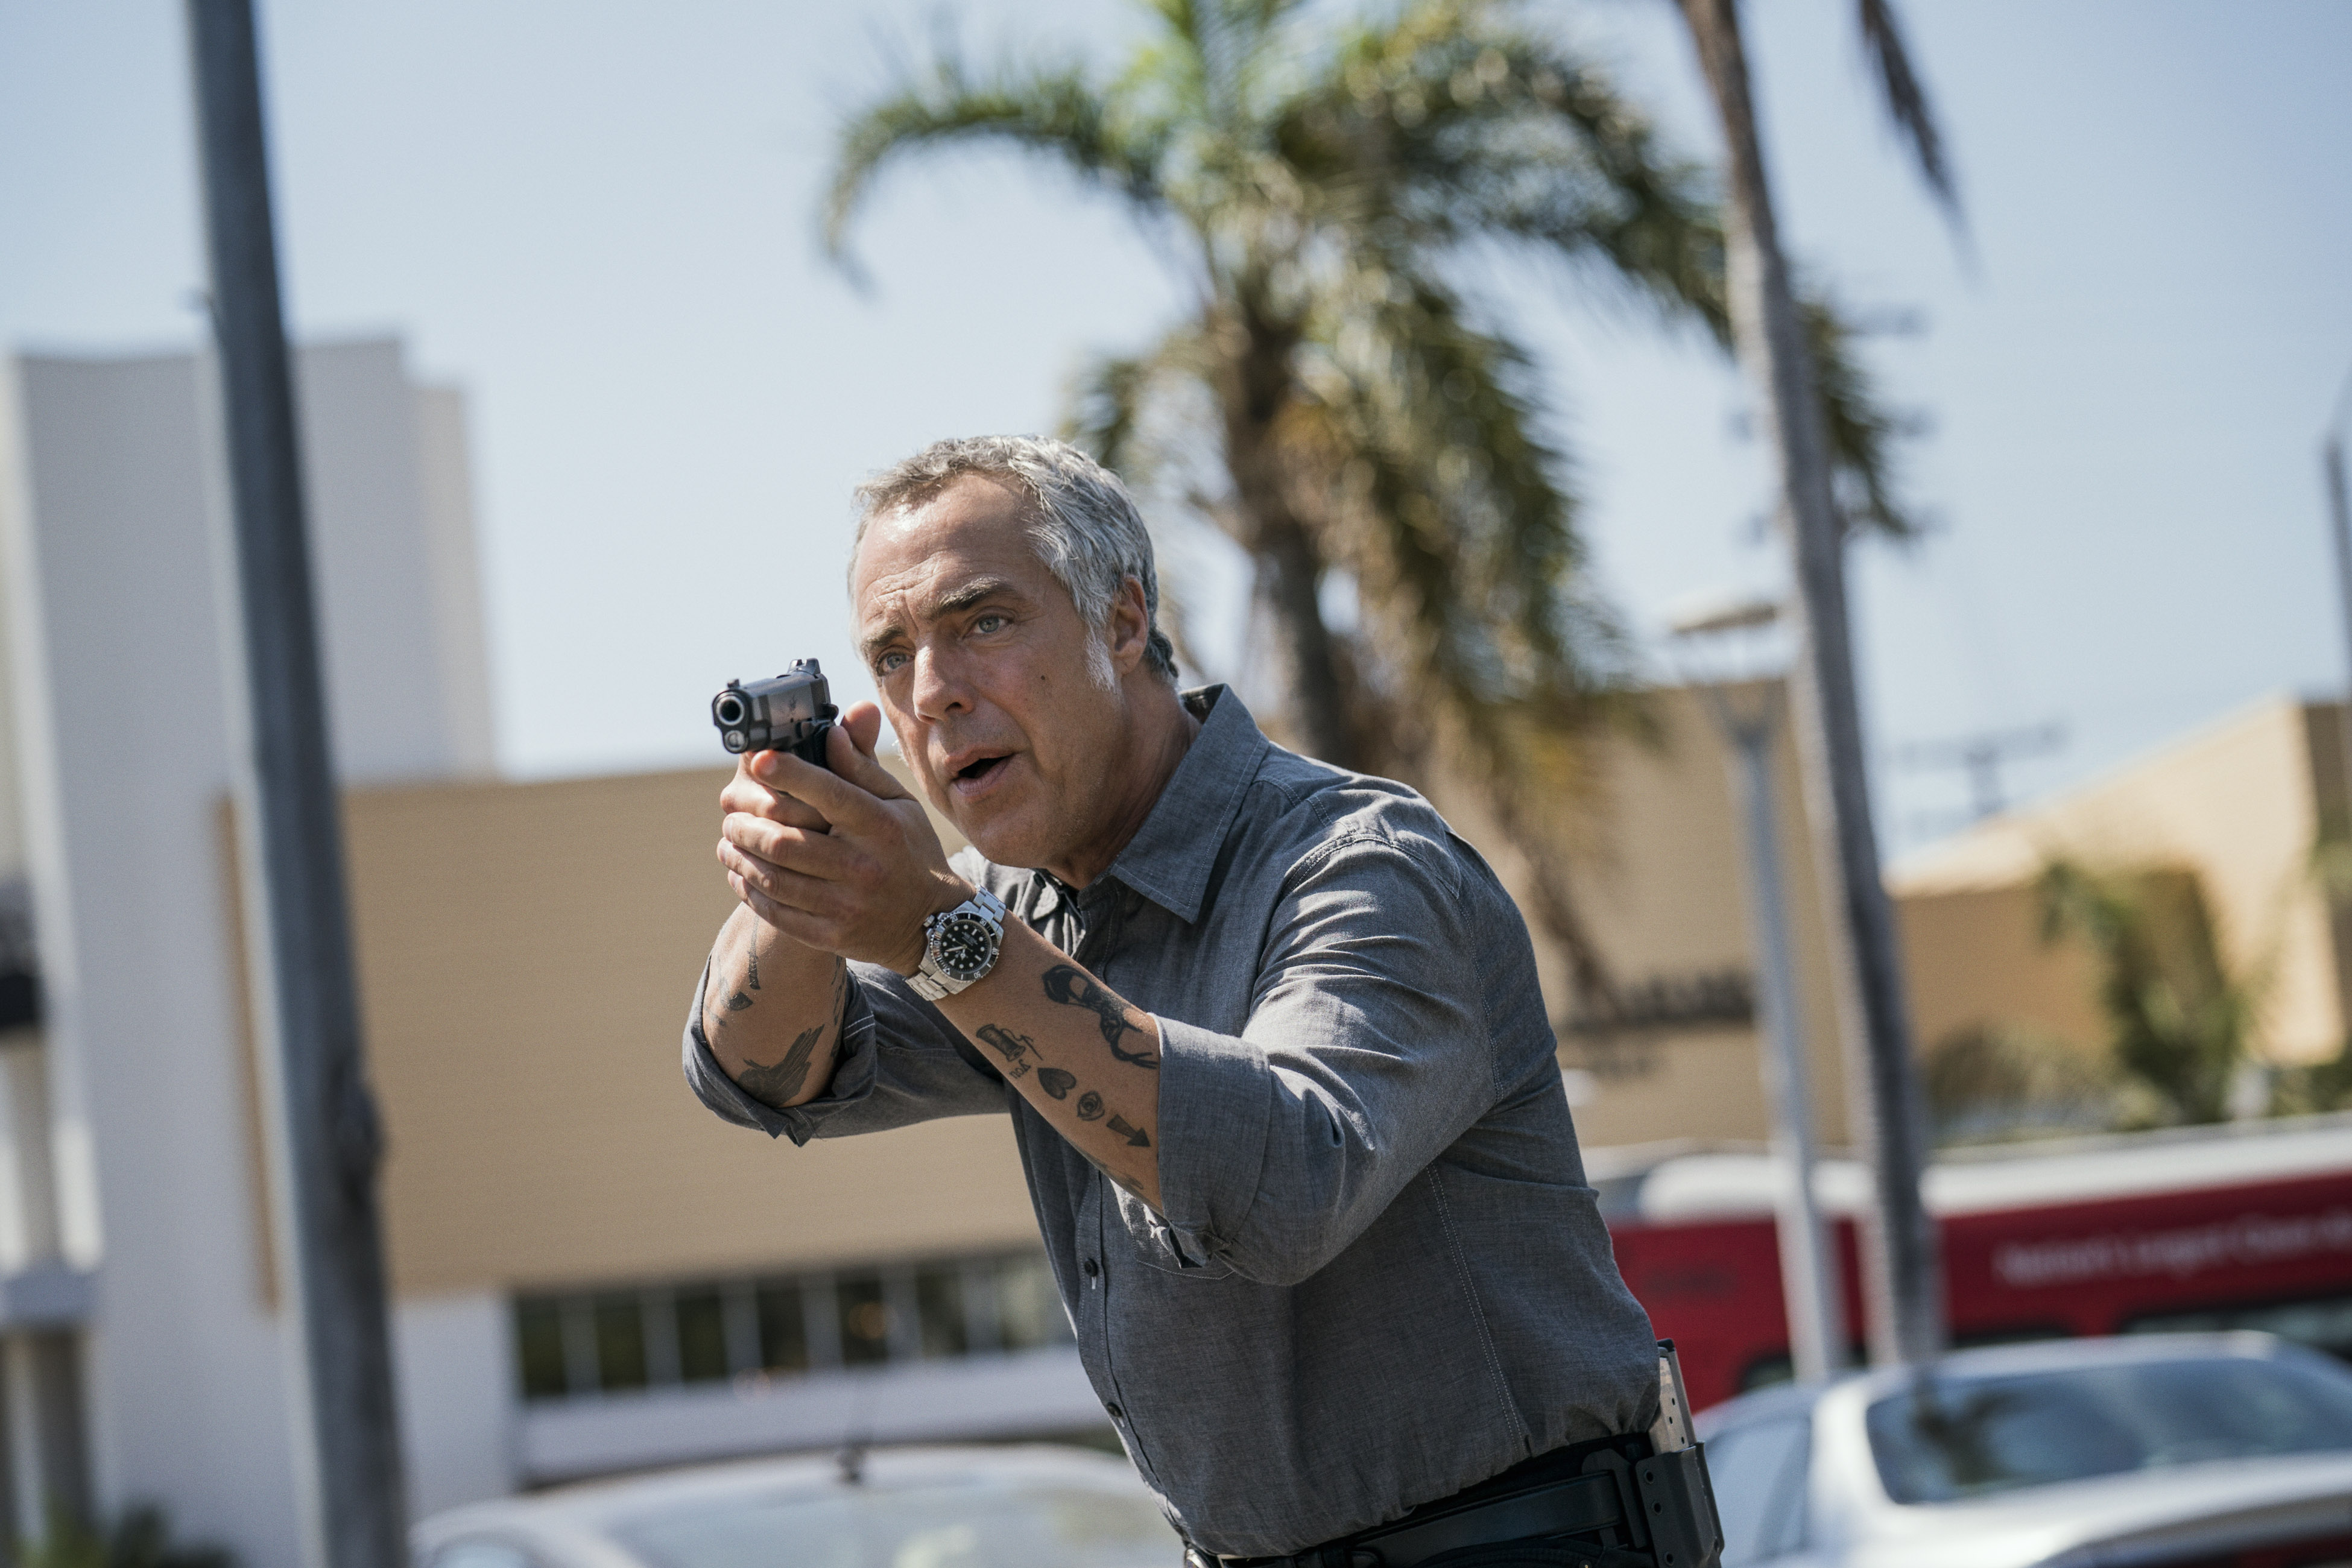 ART OF THE CUT with the editors of Amazon Studios' "Bosch" 11